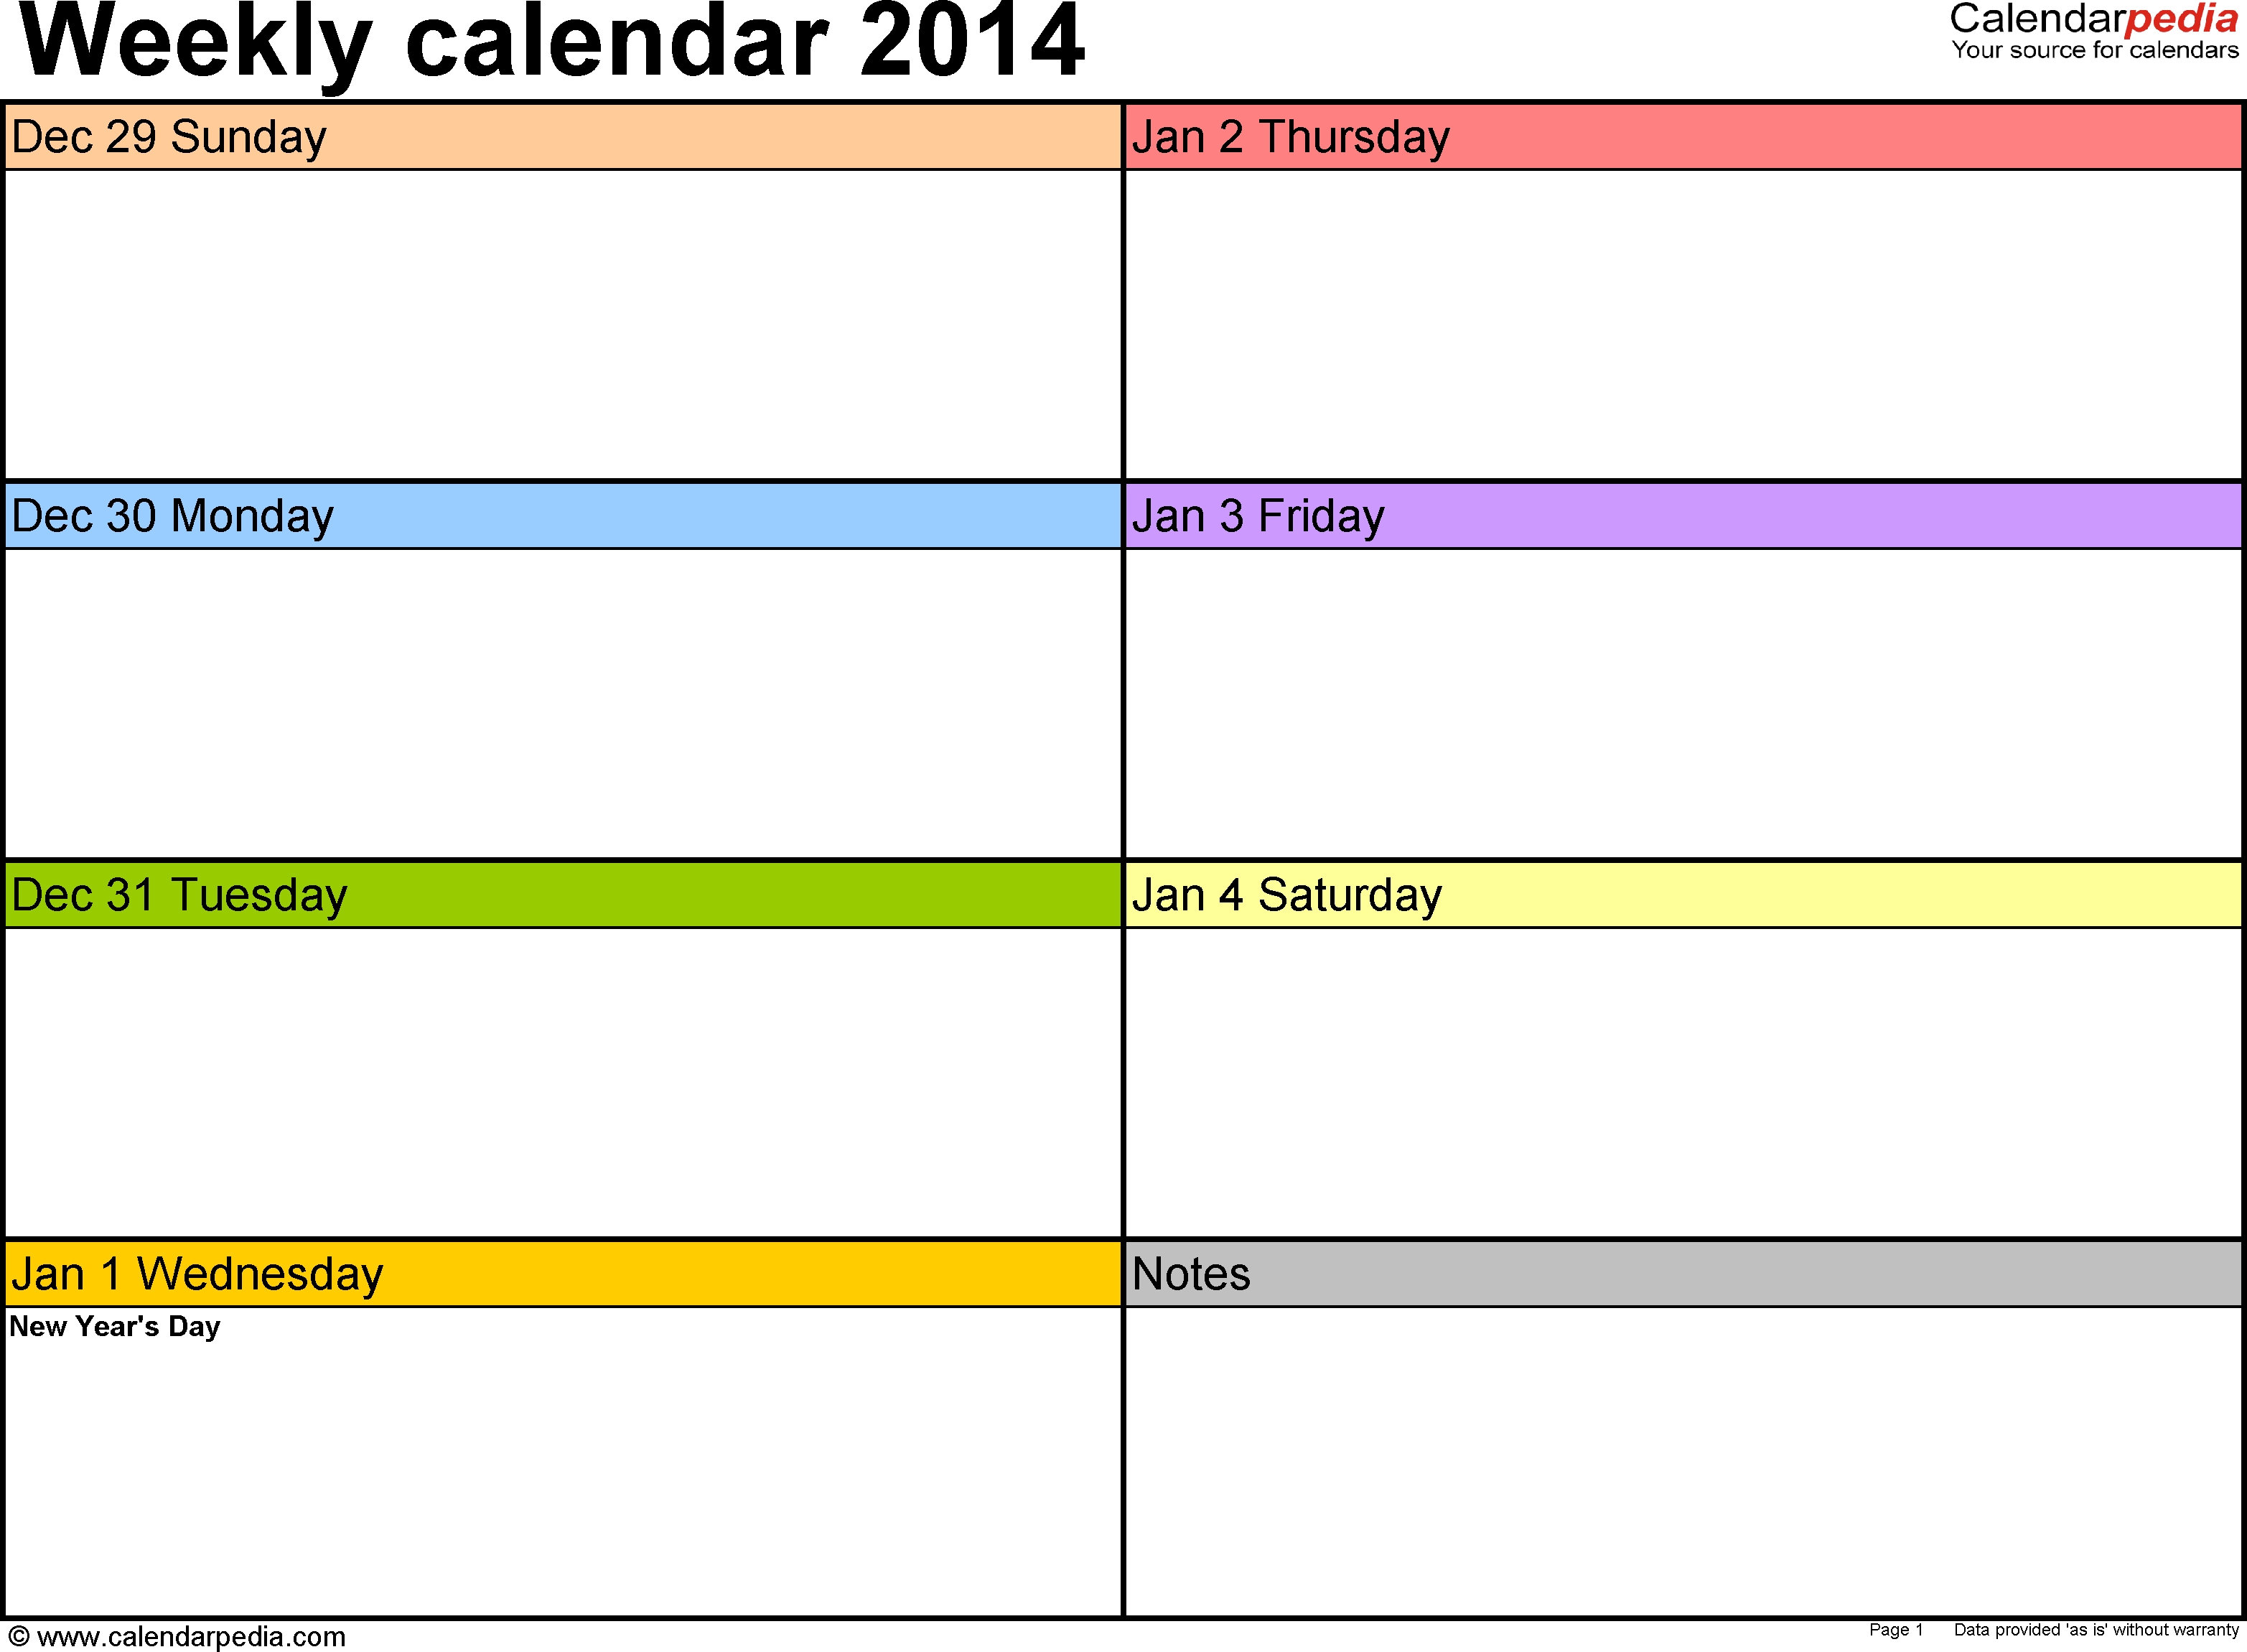 Weekly Calendars 2014 For Excel - 4 Free Printable Templates